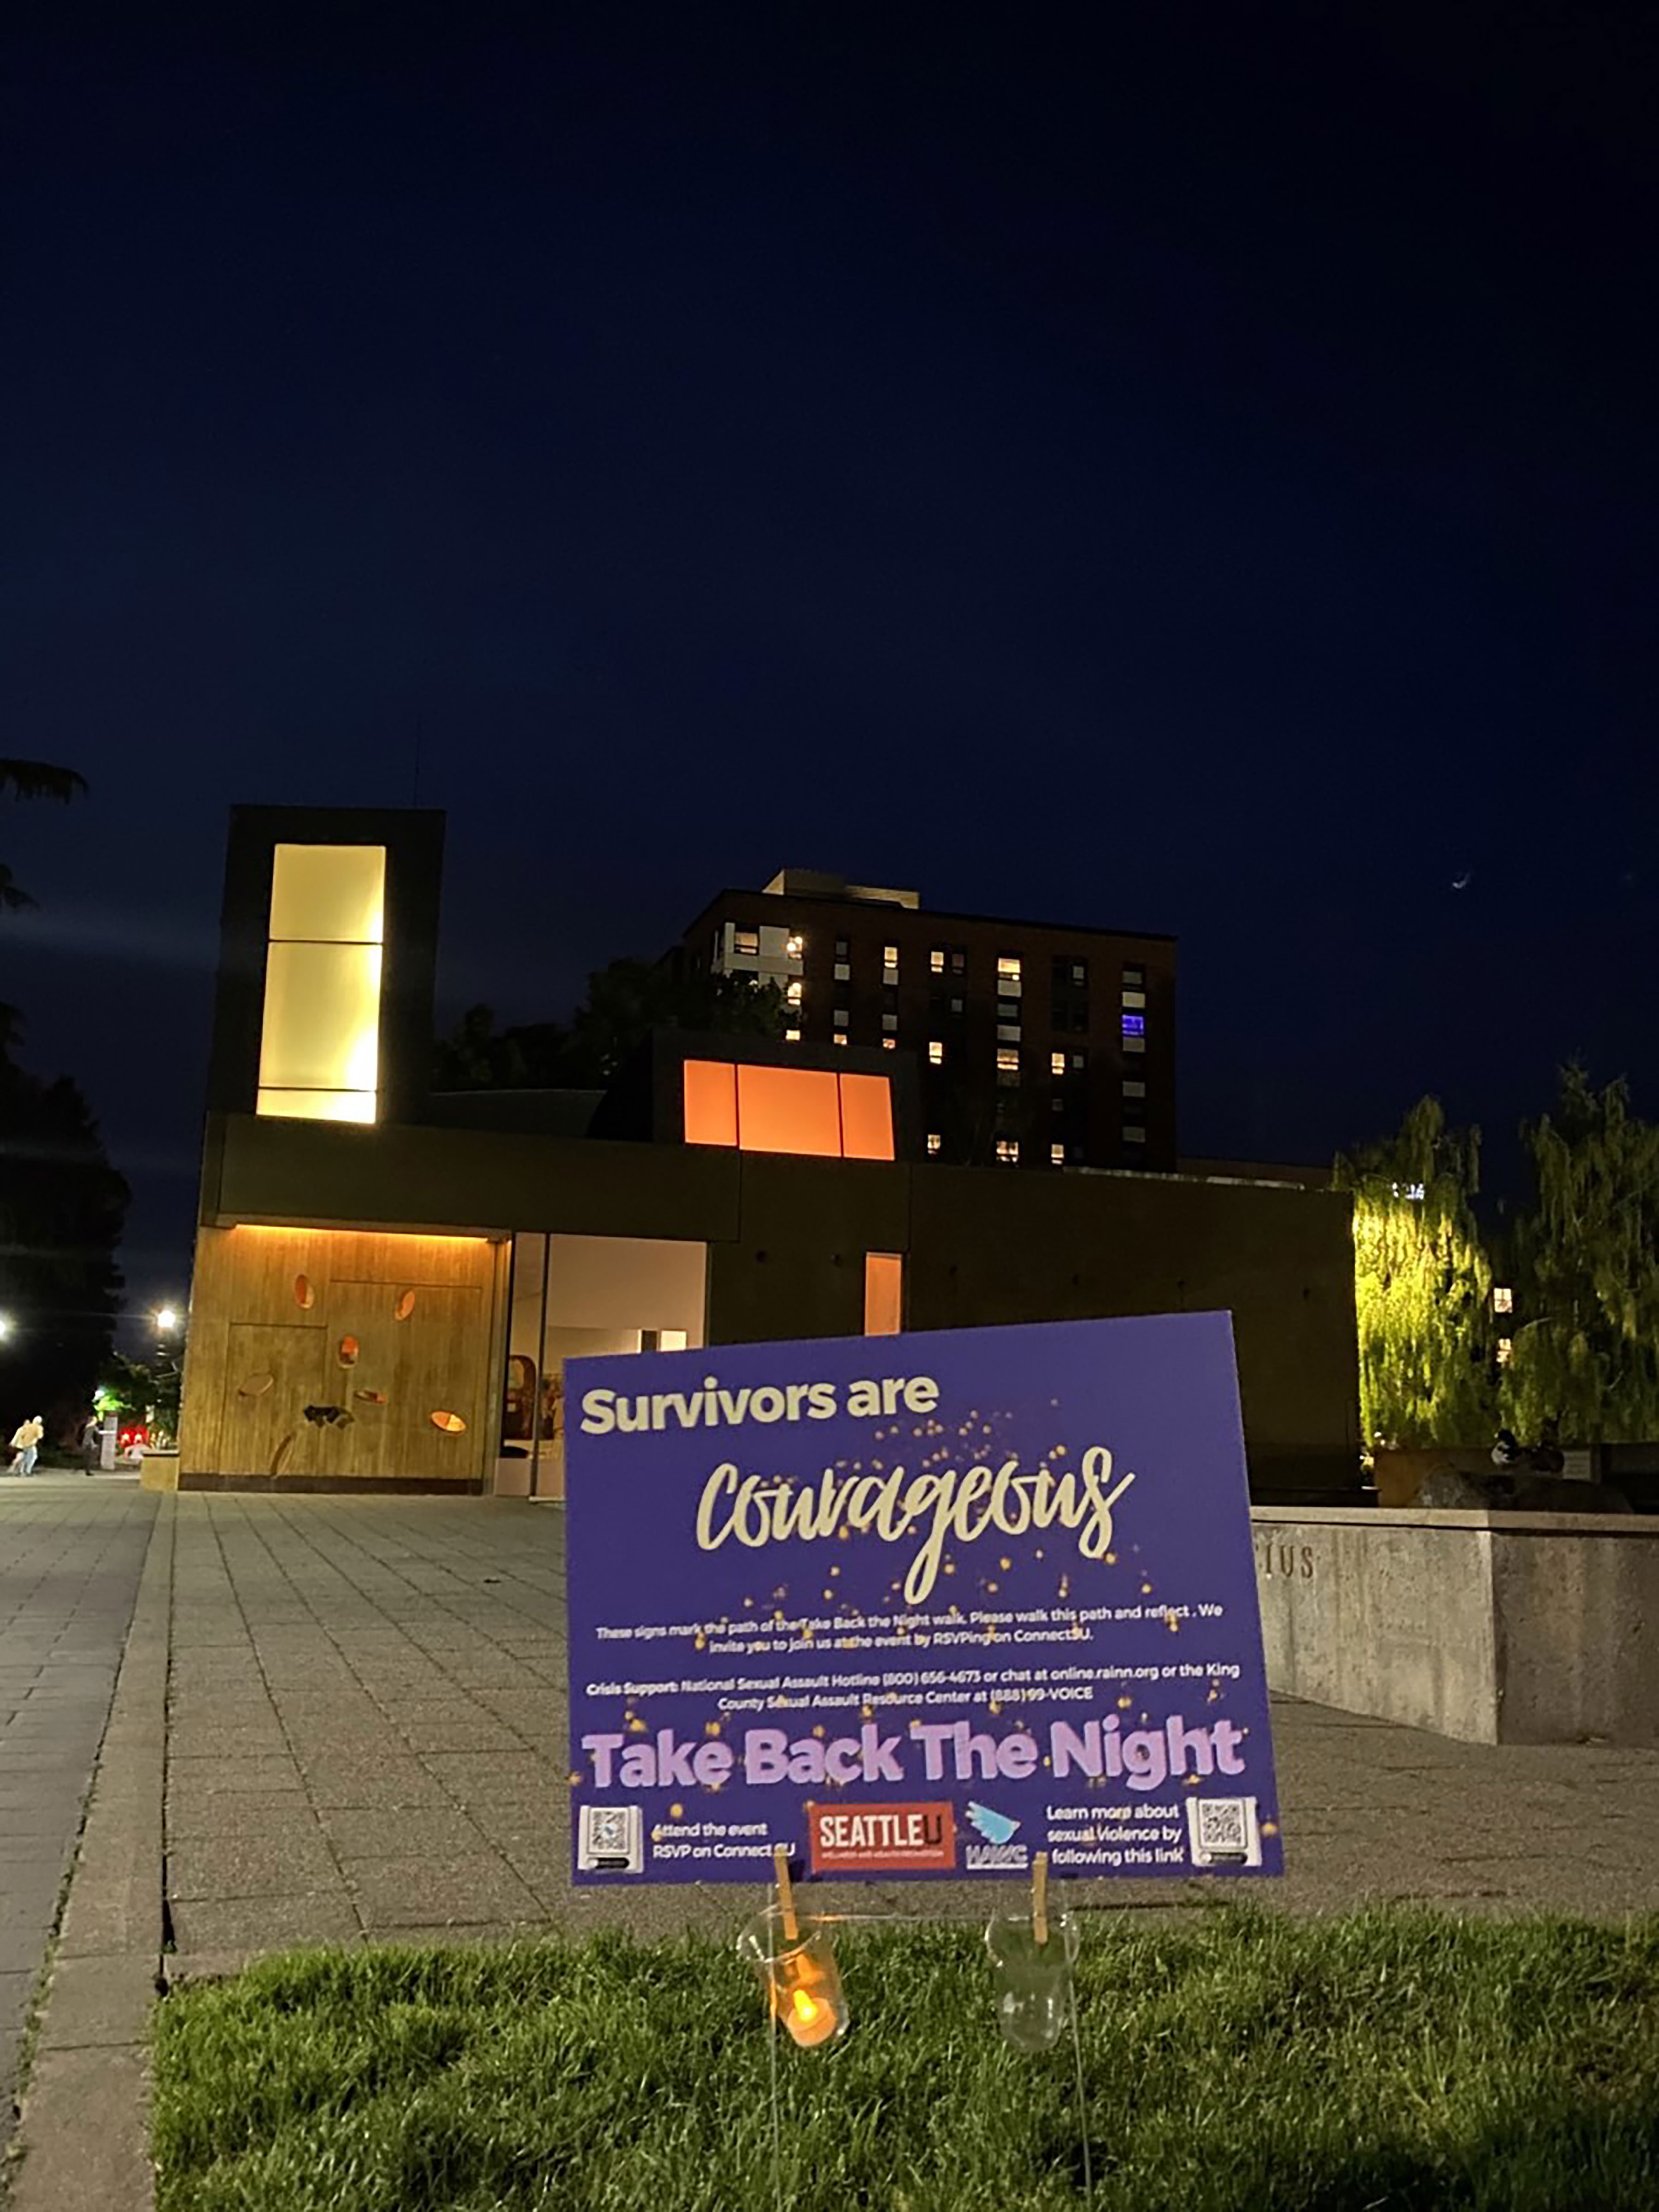 Take Back the Night 18 x 24 Coroplast Signs